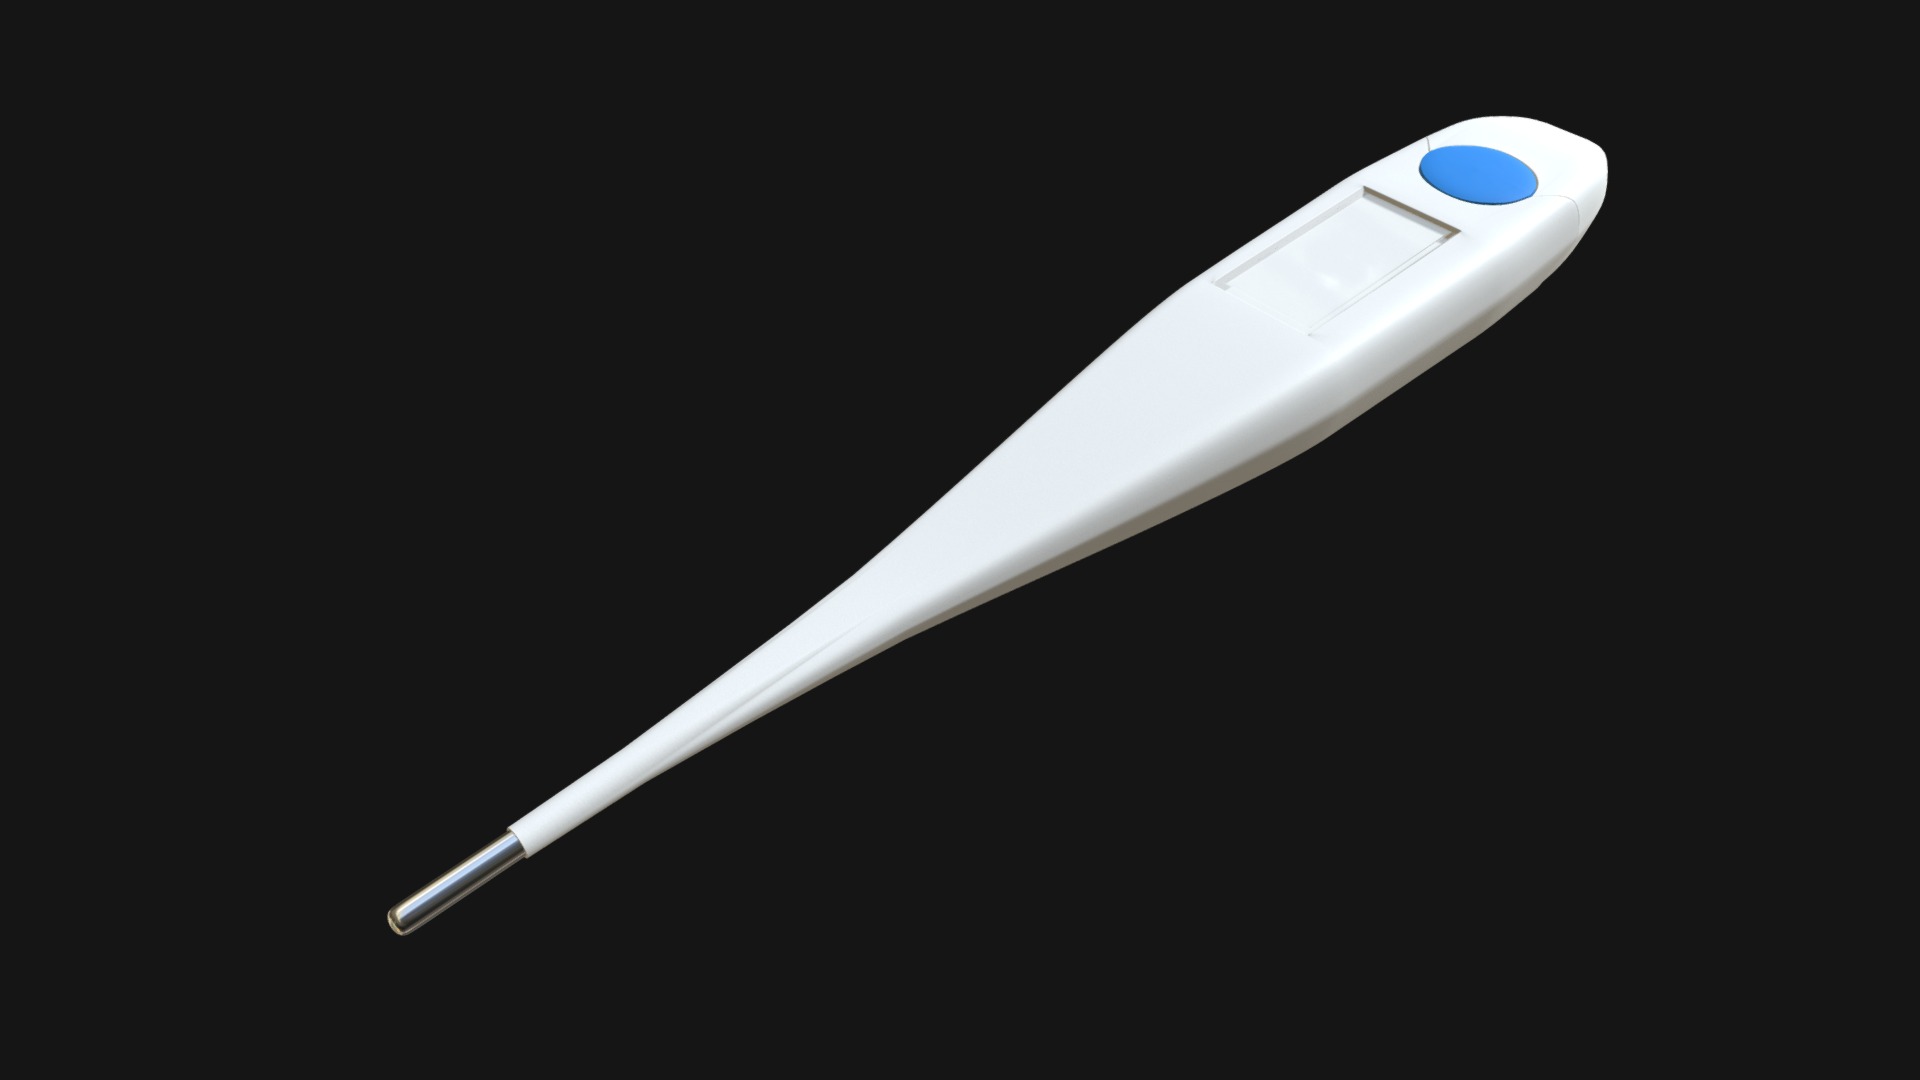 3D model Digital thermometer - This is a 3D model of the Digital thermometer. The 3D model is about a white and blue knife.